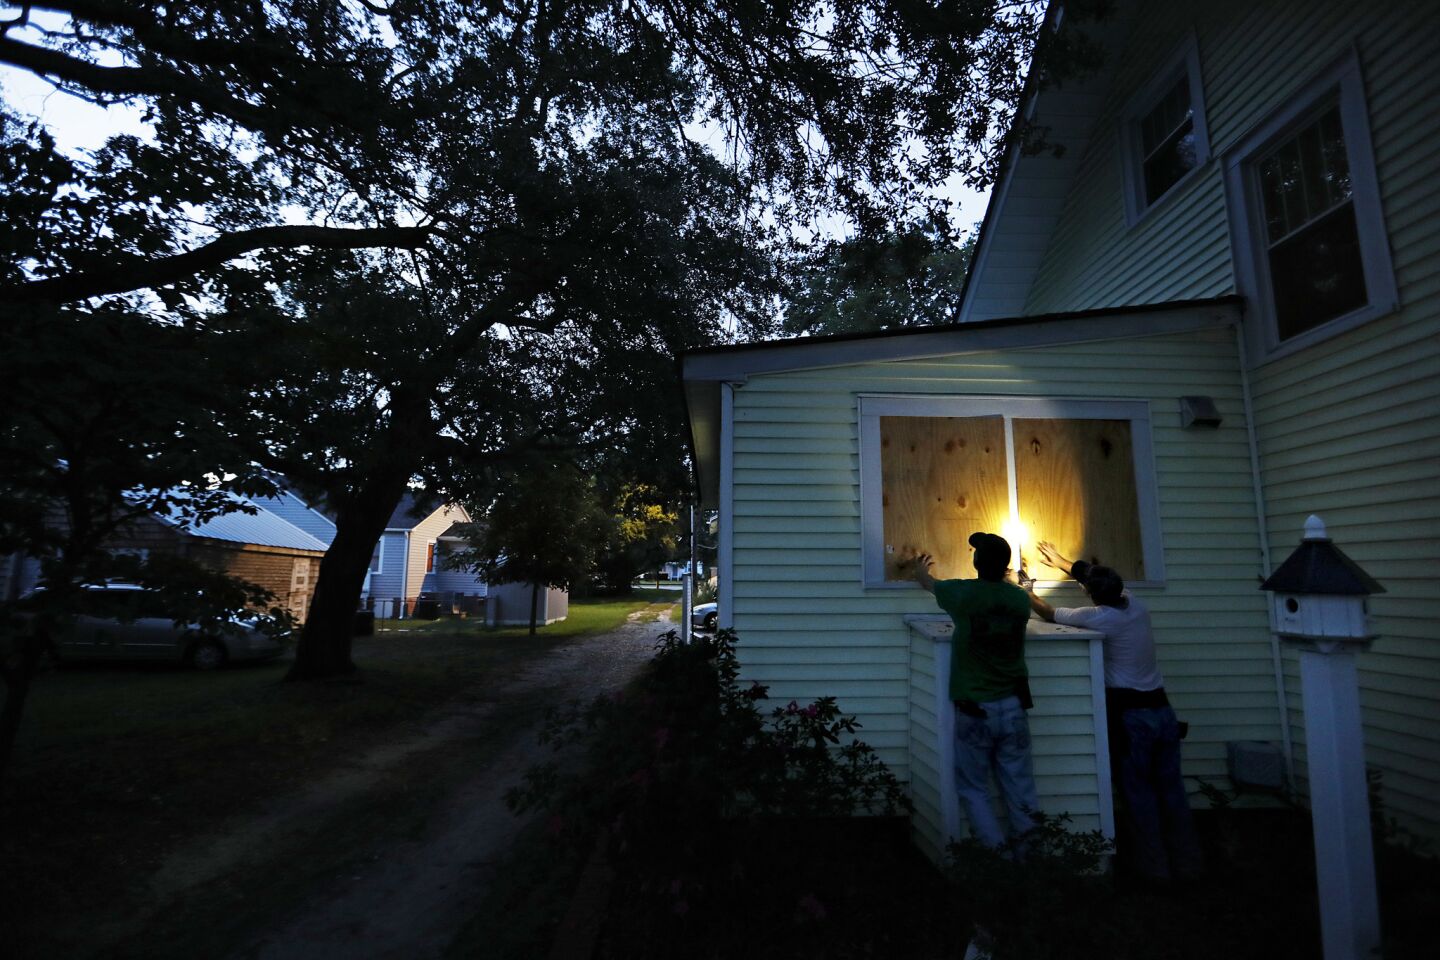 Russell Meadows, left, helps neighbor Rob Muller board up his home ahead of Hurricane Florence in Morehead City, N.C., Tuesday, Sept. 11, 2018. Florence exploded into a potentially catastrophic hurricane Monday as it closed in on North and South Carolina, carrying winds up to 140 mph (220 kph) and water that could wreak havoc over a wide stretch of the eastern United States later this week.